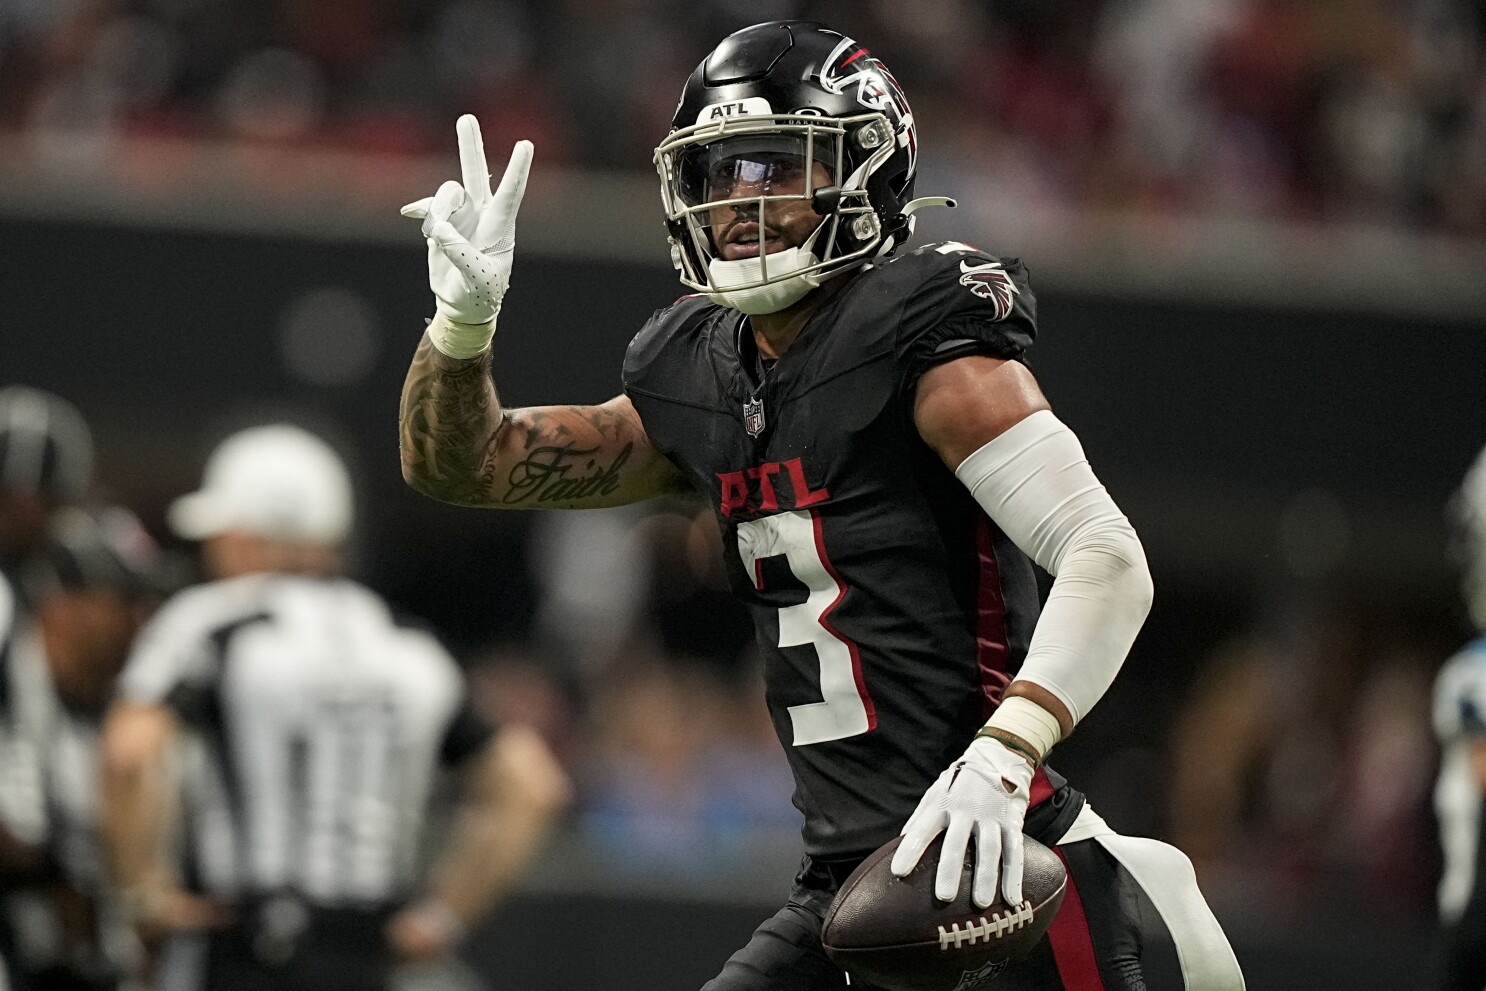 Jessie Bates III had 'a great time' in Falcons win over Panthers